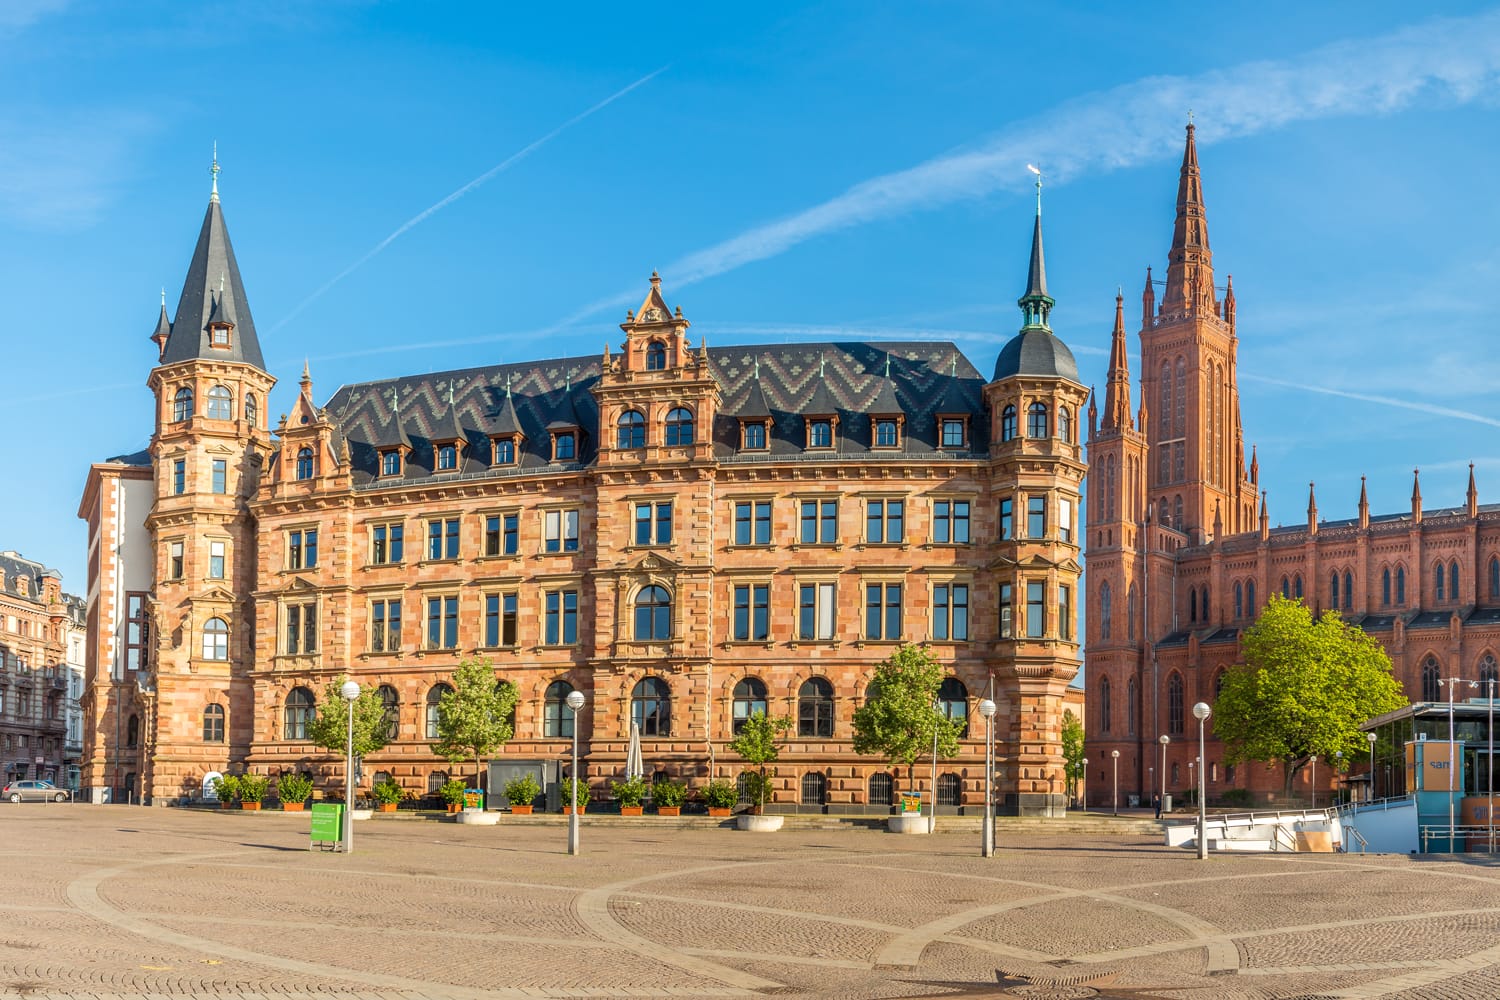 Panoramic view at the Markt place with City hall and Markt church in Wiesbaden, Germany